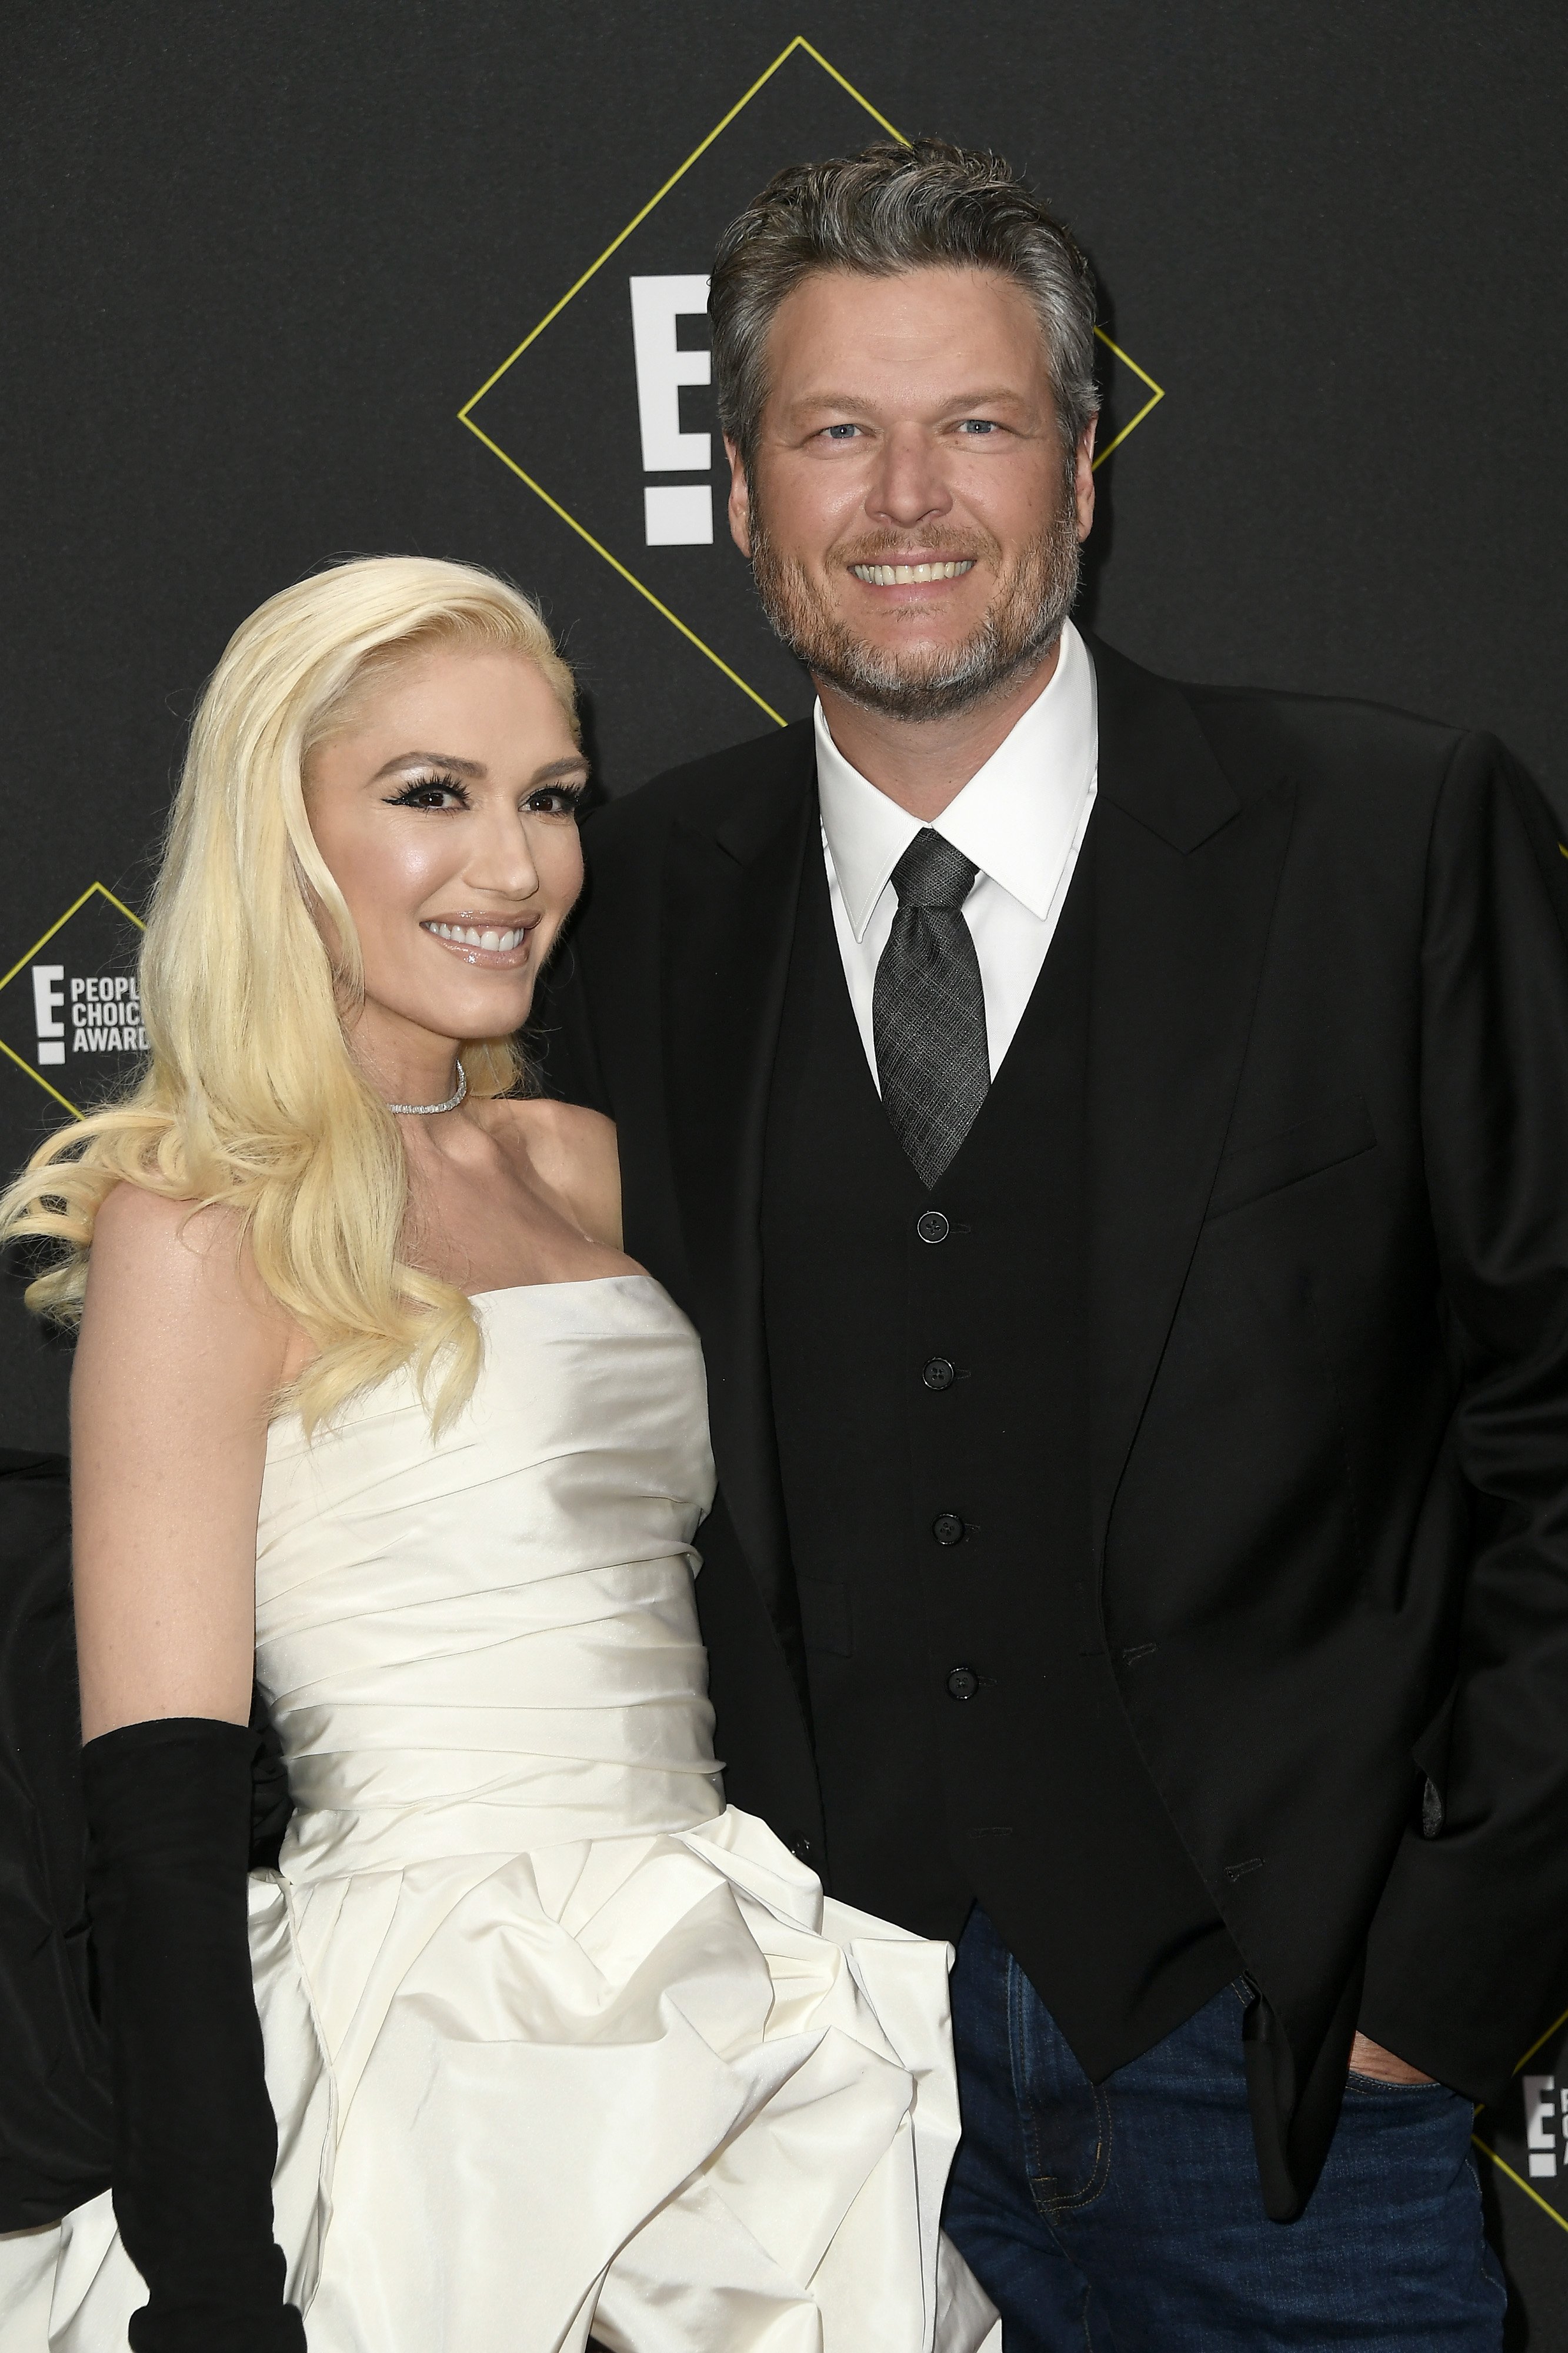 Gwen Stefani and Blake Shelton attend the 2019 E! People's Choice Awards at Barker Hangar on November 10, 2019, in Santa Monica, California. | Source: Getty Images.